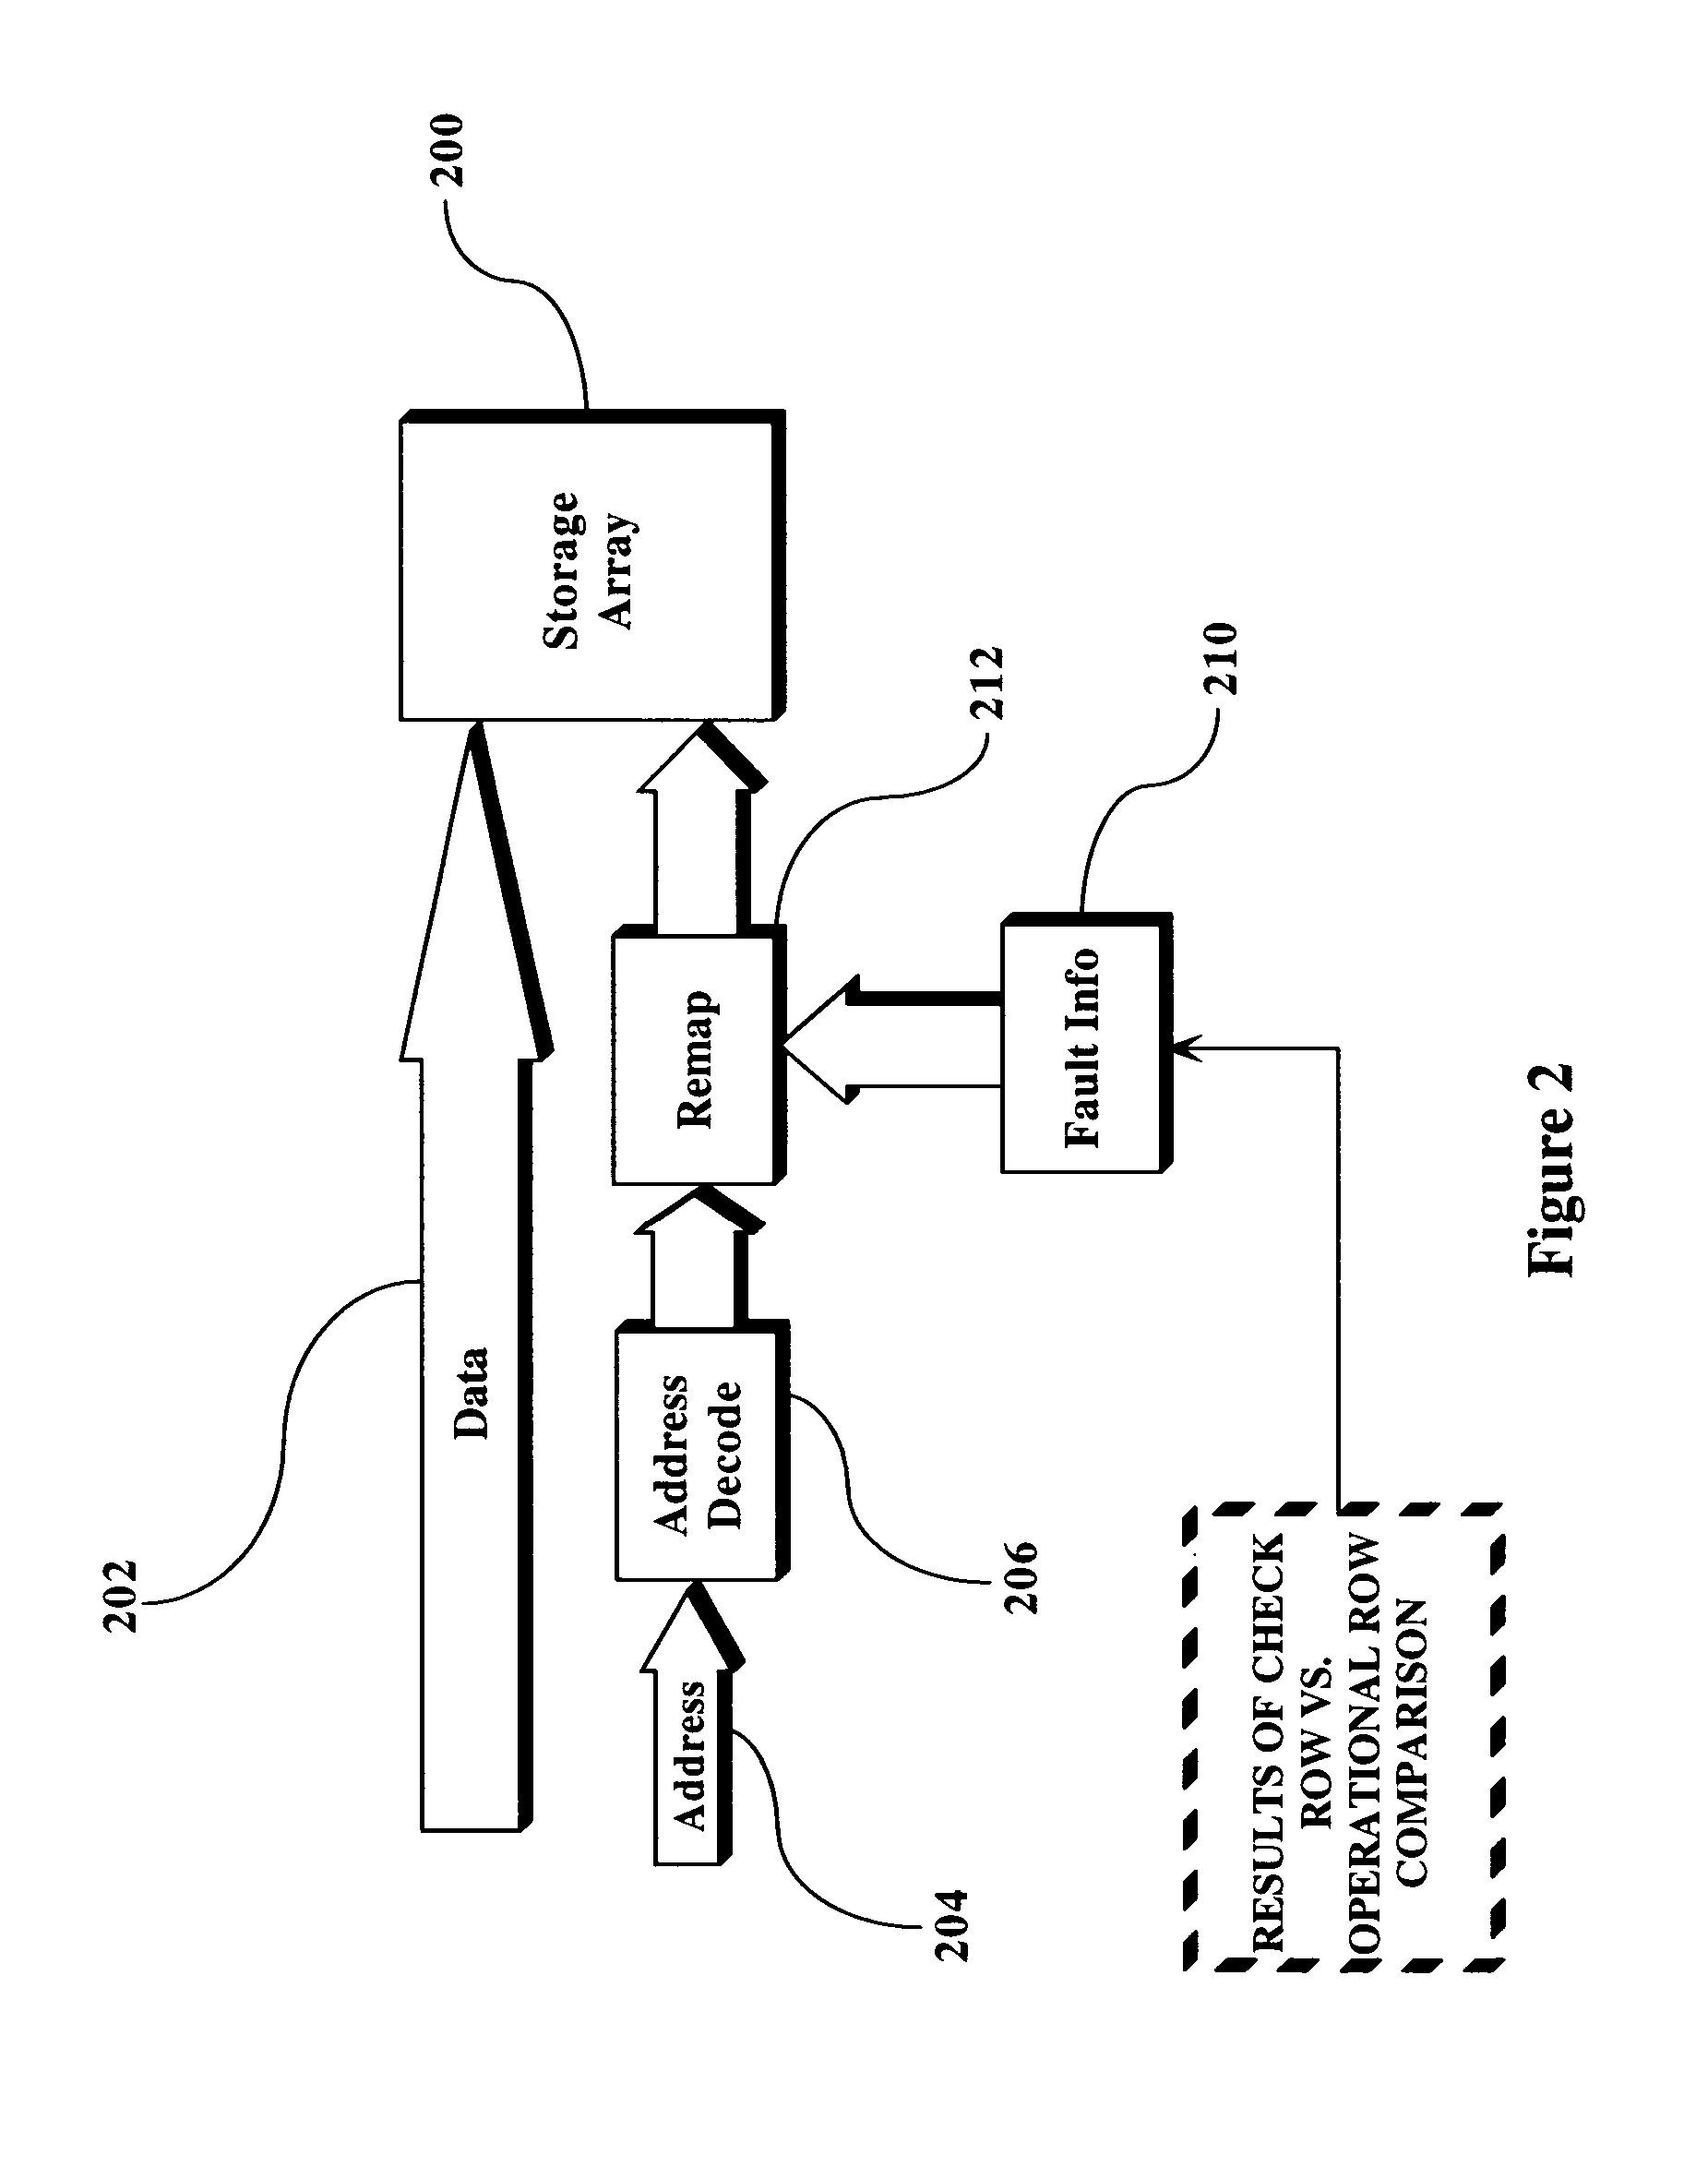 Self-repairing of microprocessor array structures